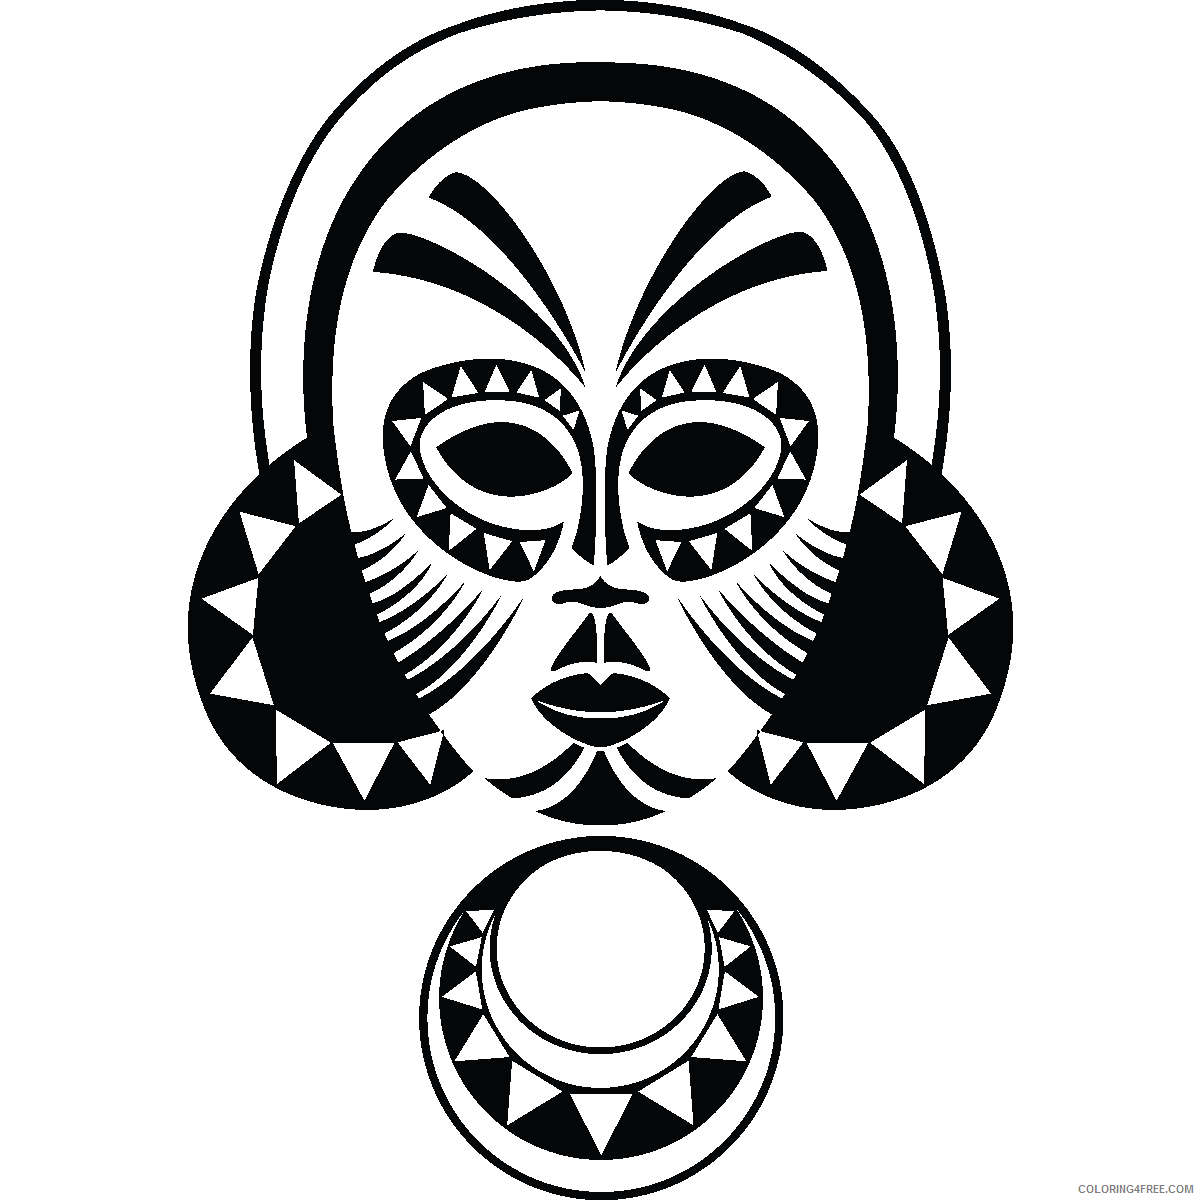 African Mask Coloring Page Printable Sheets 13 Images of Tribal Mask 2021 a 2815 Coloring4free